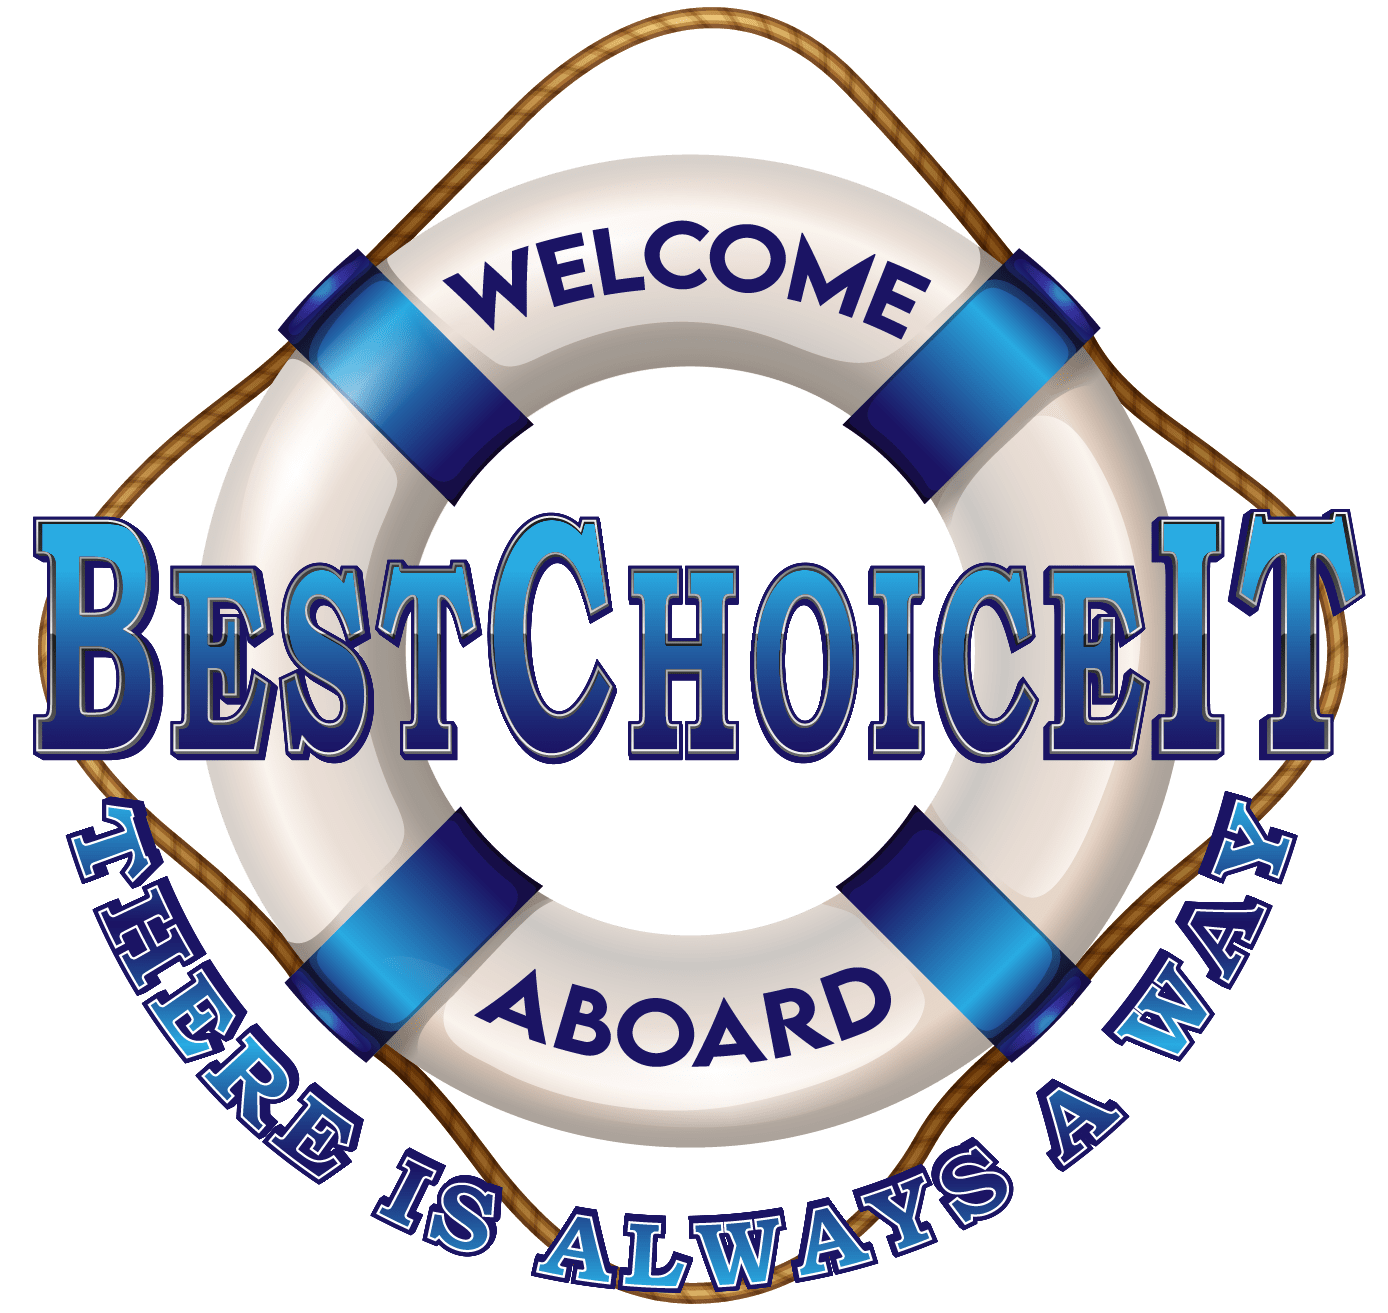 Lifebuoy with "Best Choice IT Welcome Aboard" text.